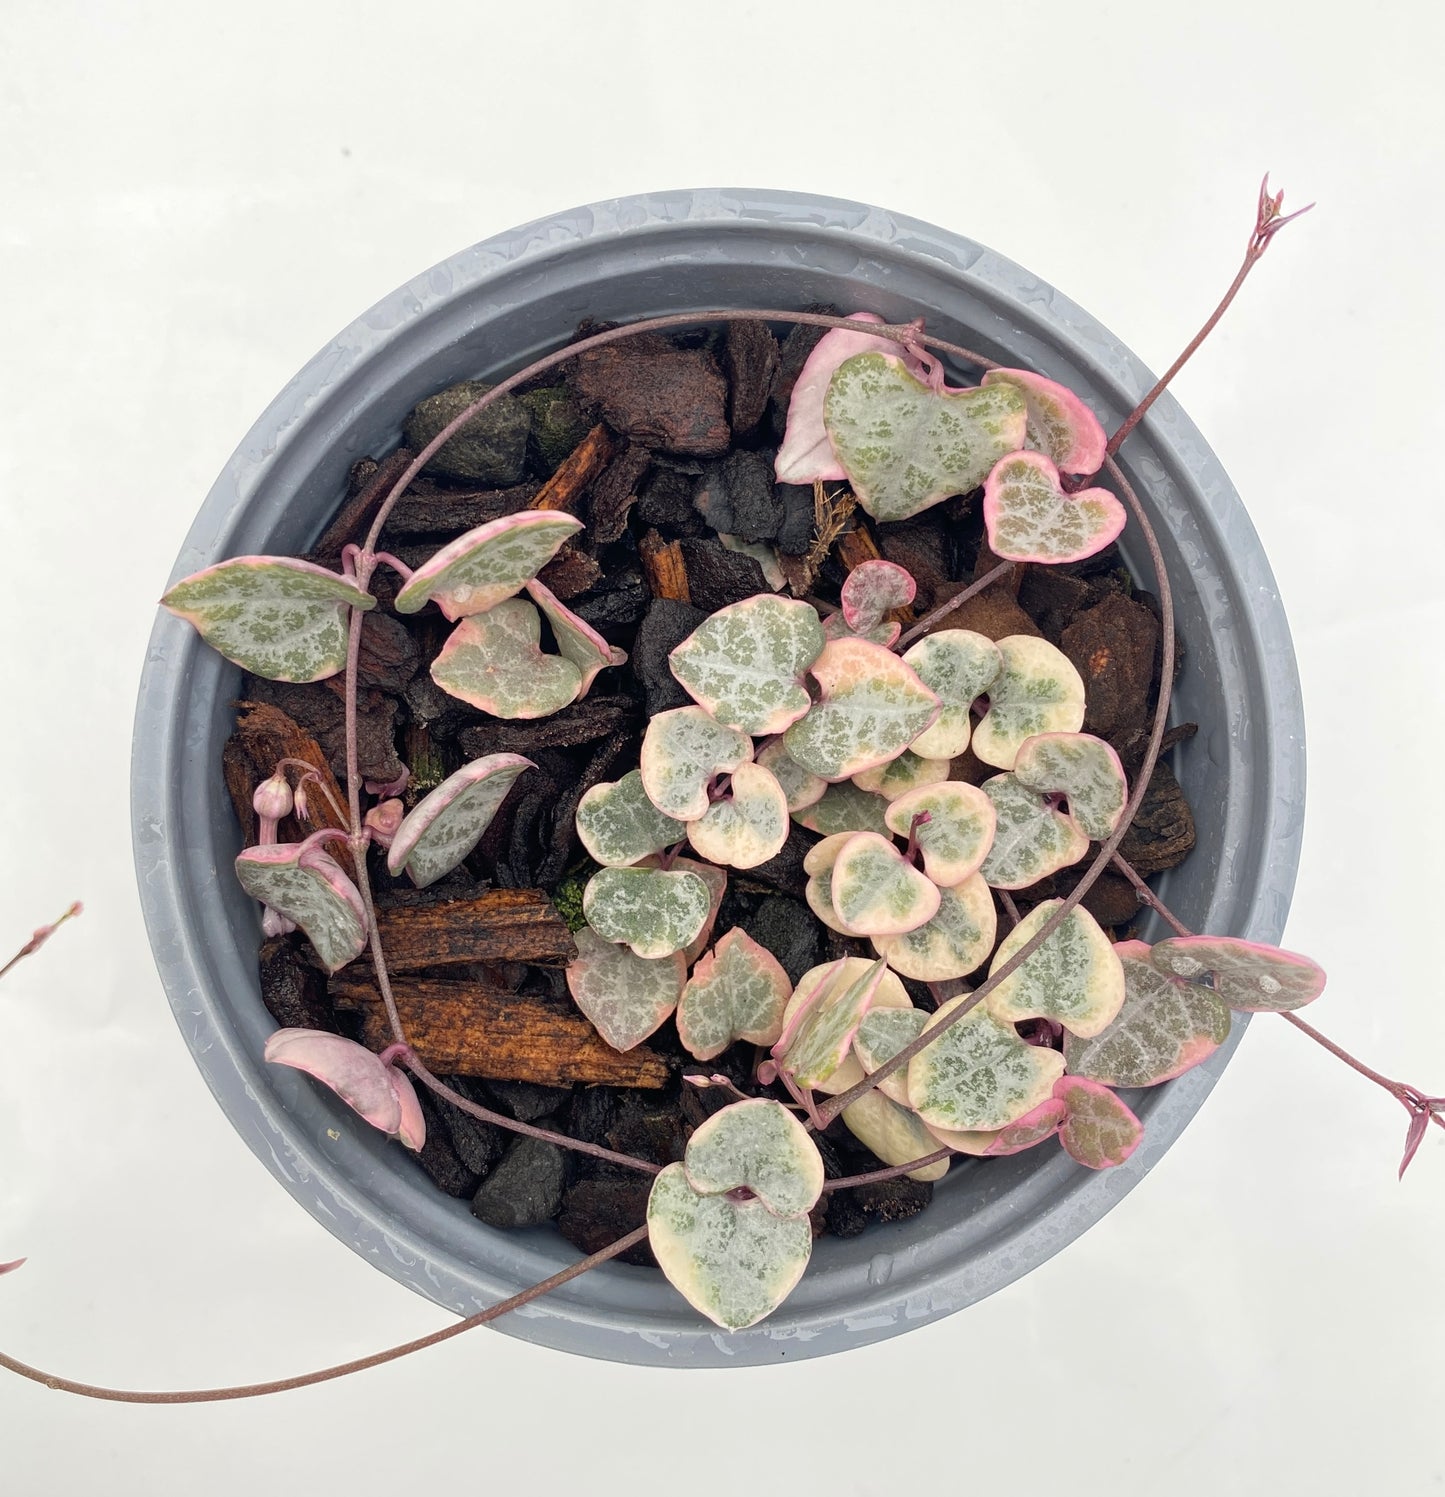 Variegated Chain of Hearts - Ceropegia woodii variegated 12cm pot